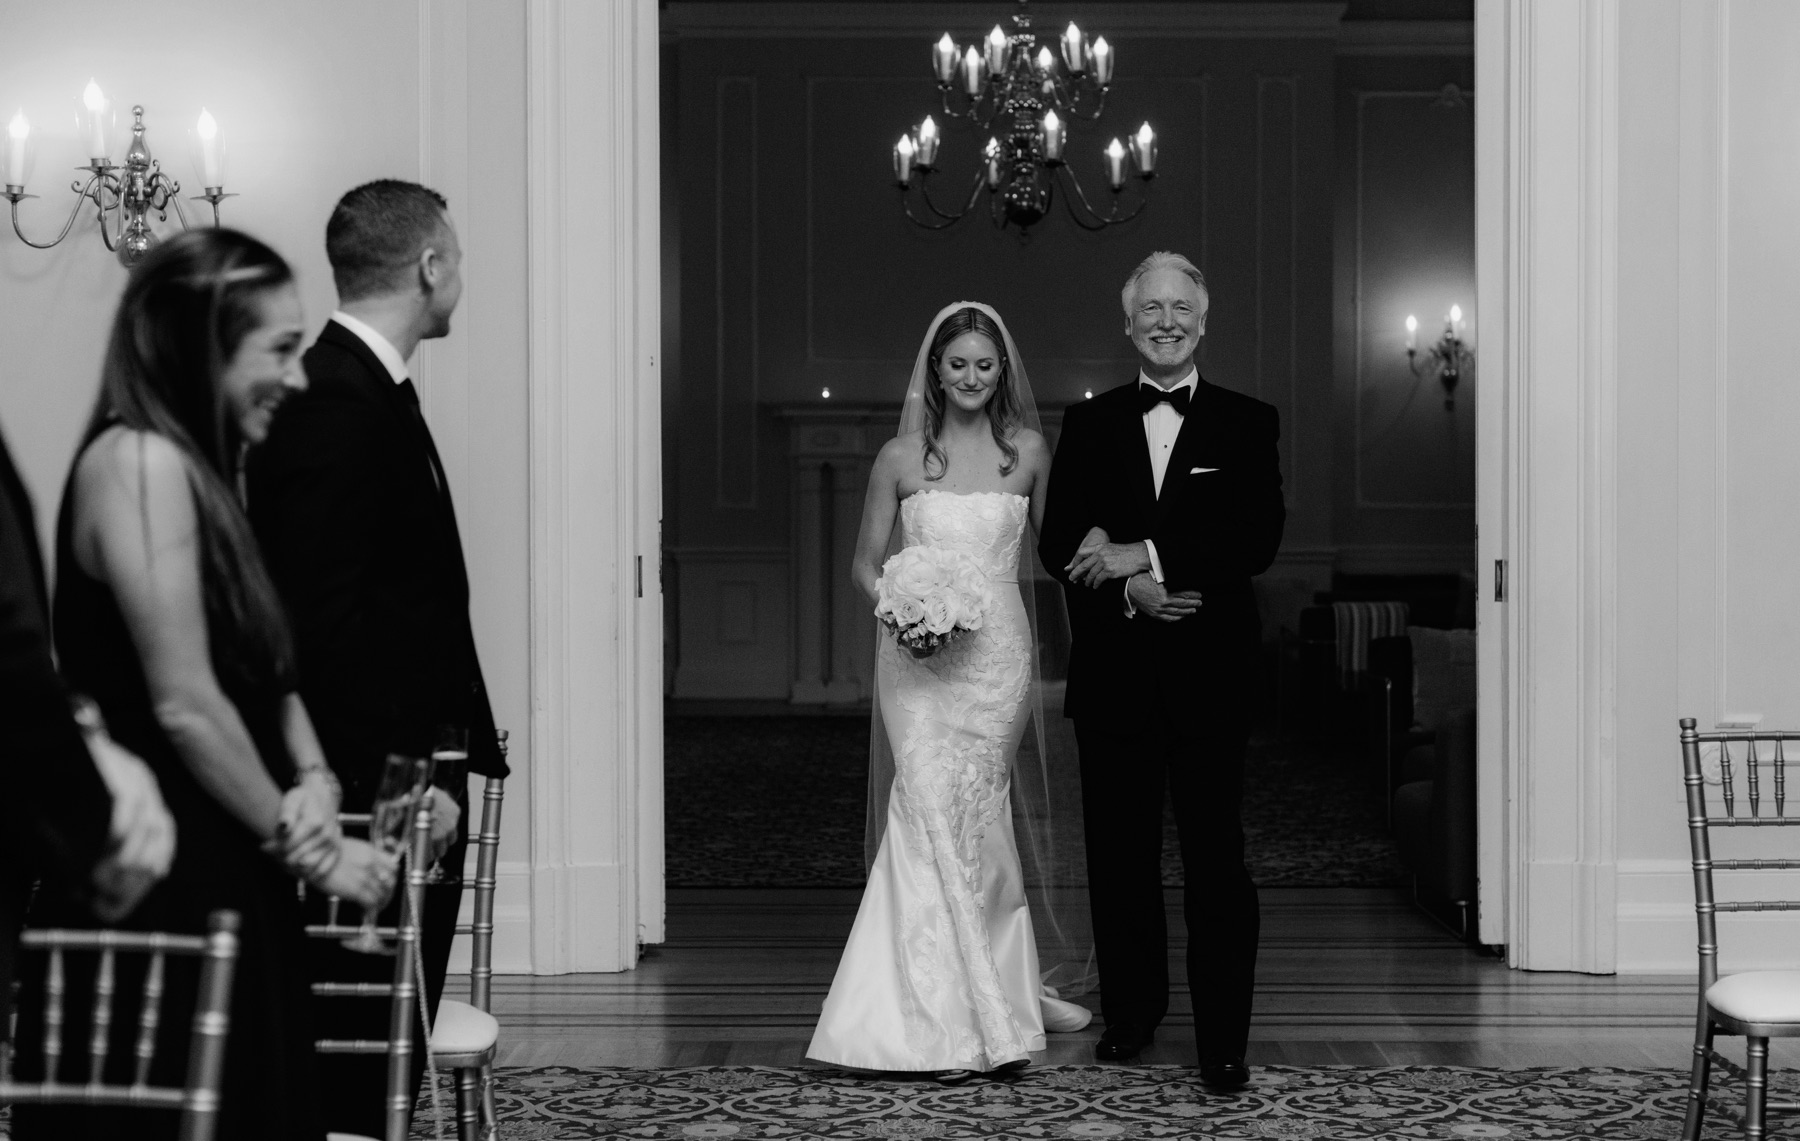 Father walking his daughter down the aisle at an indoor black tie ceremony at The Vancouver Club